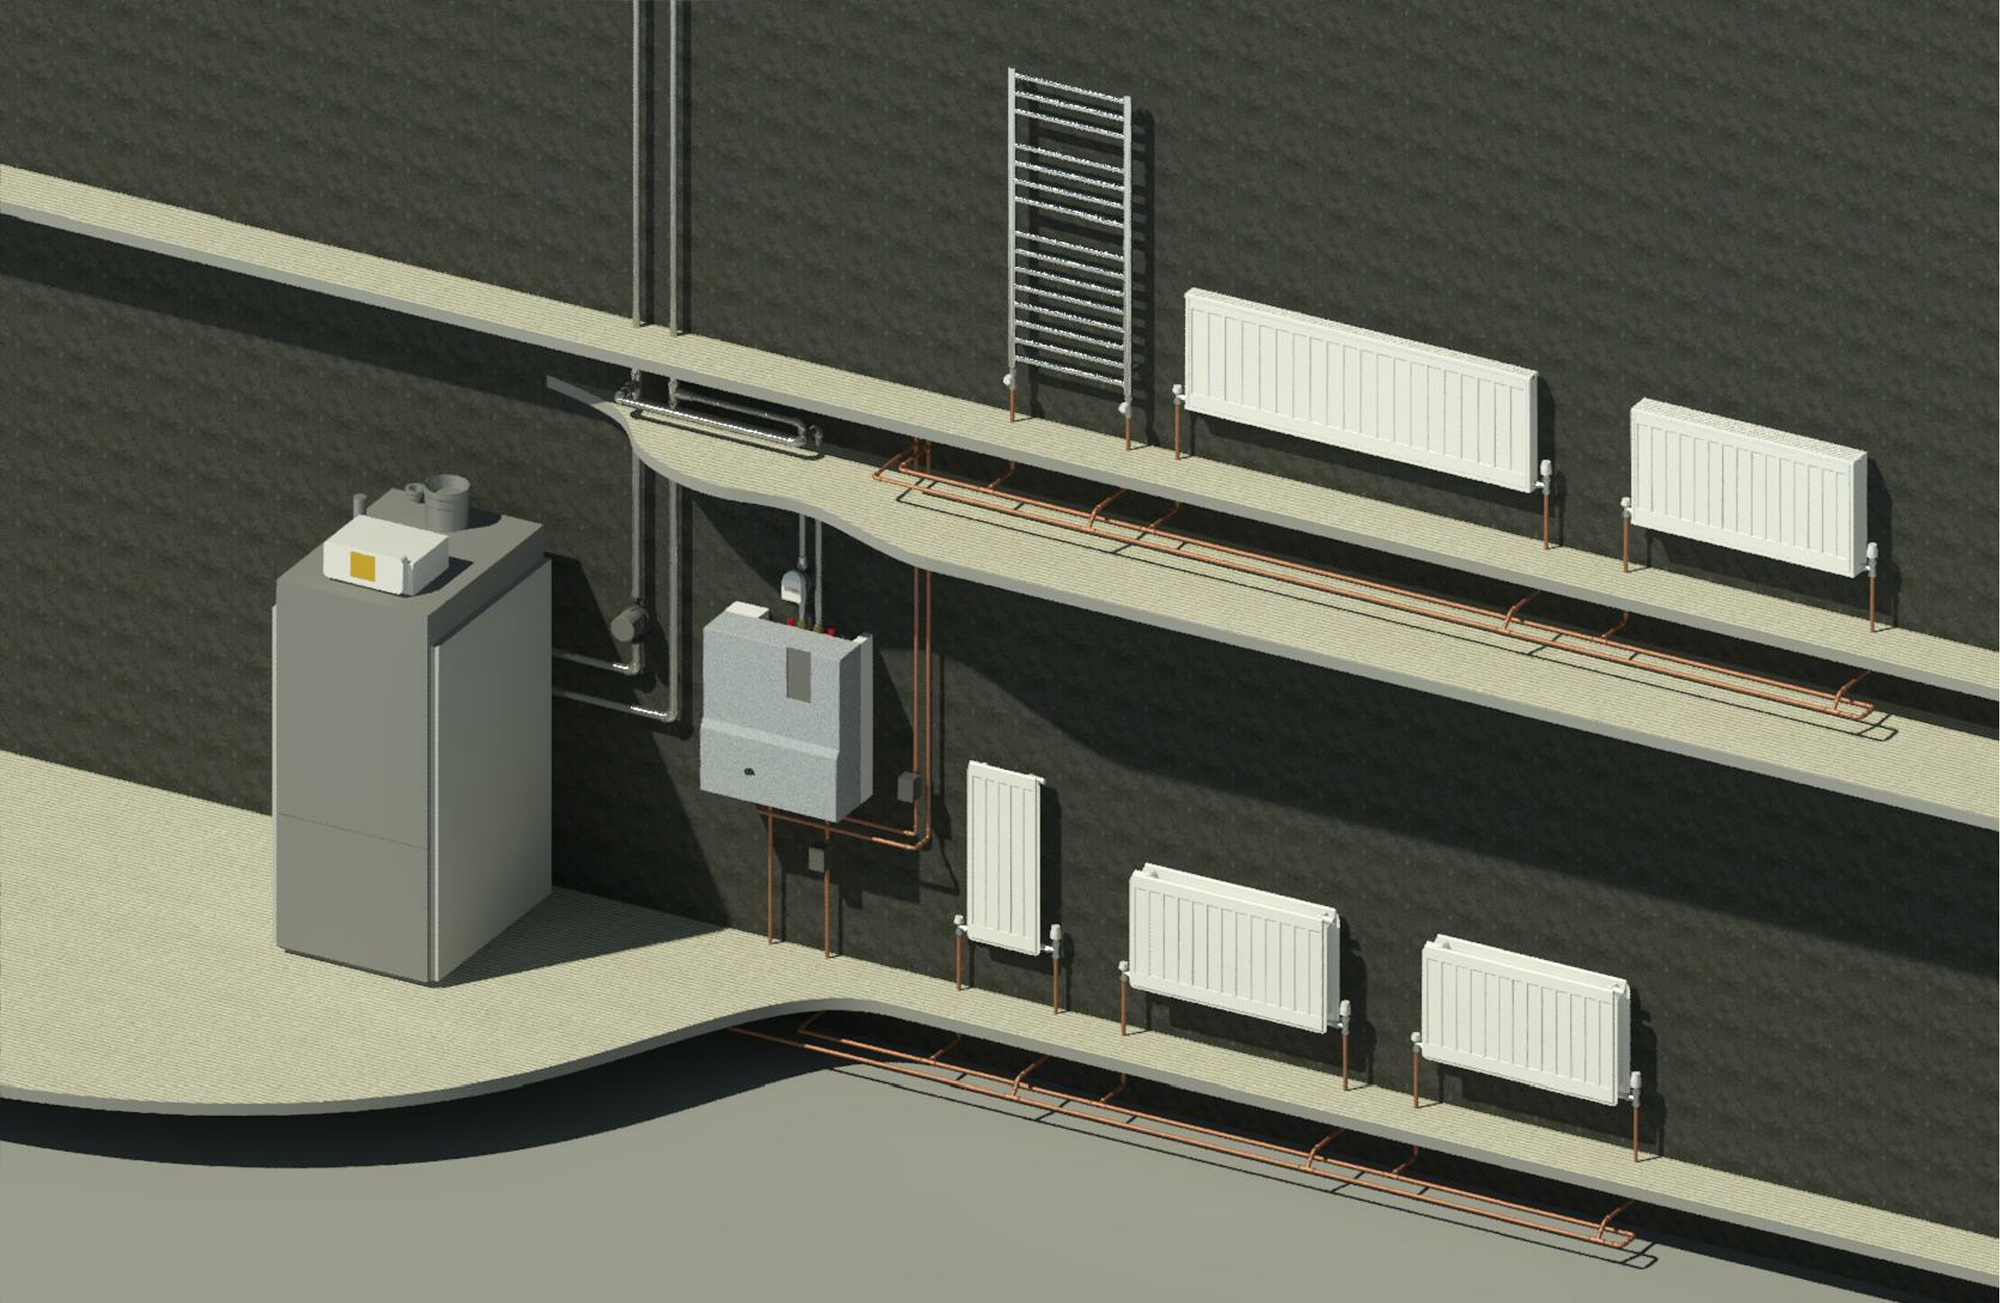 Rendering of complete central heating system showing all families with connected pipework.